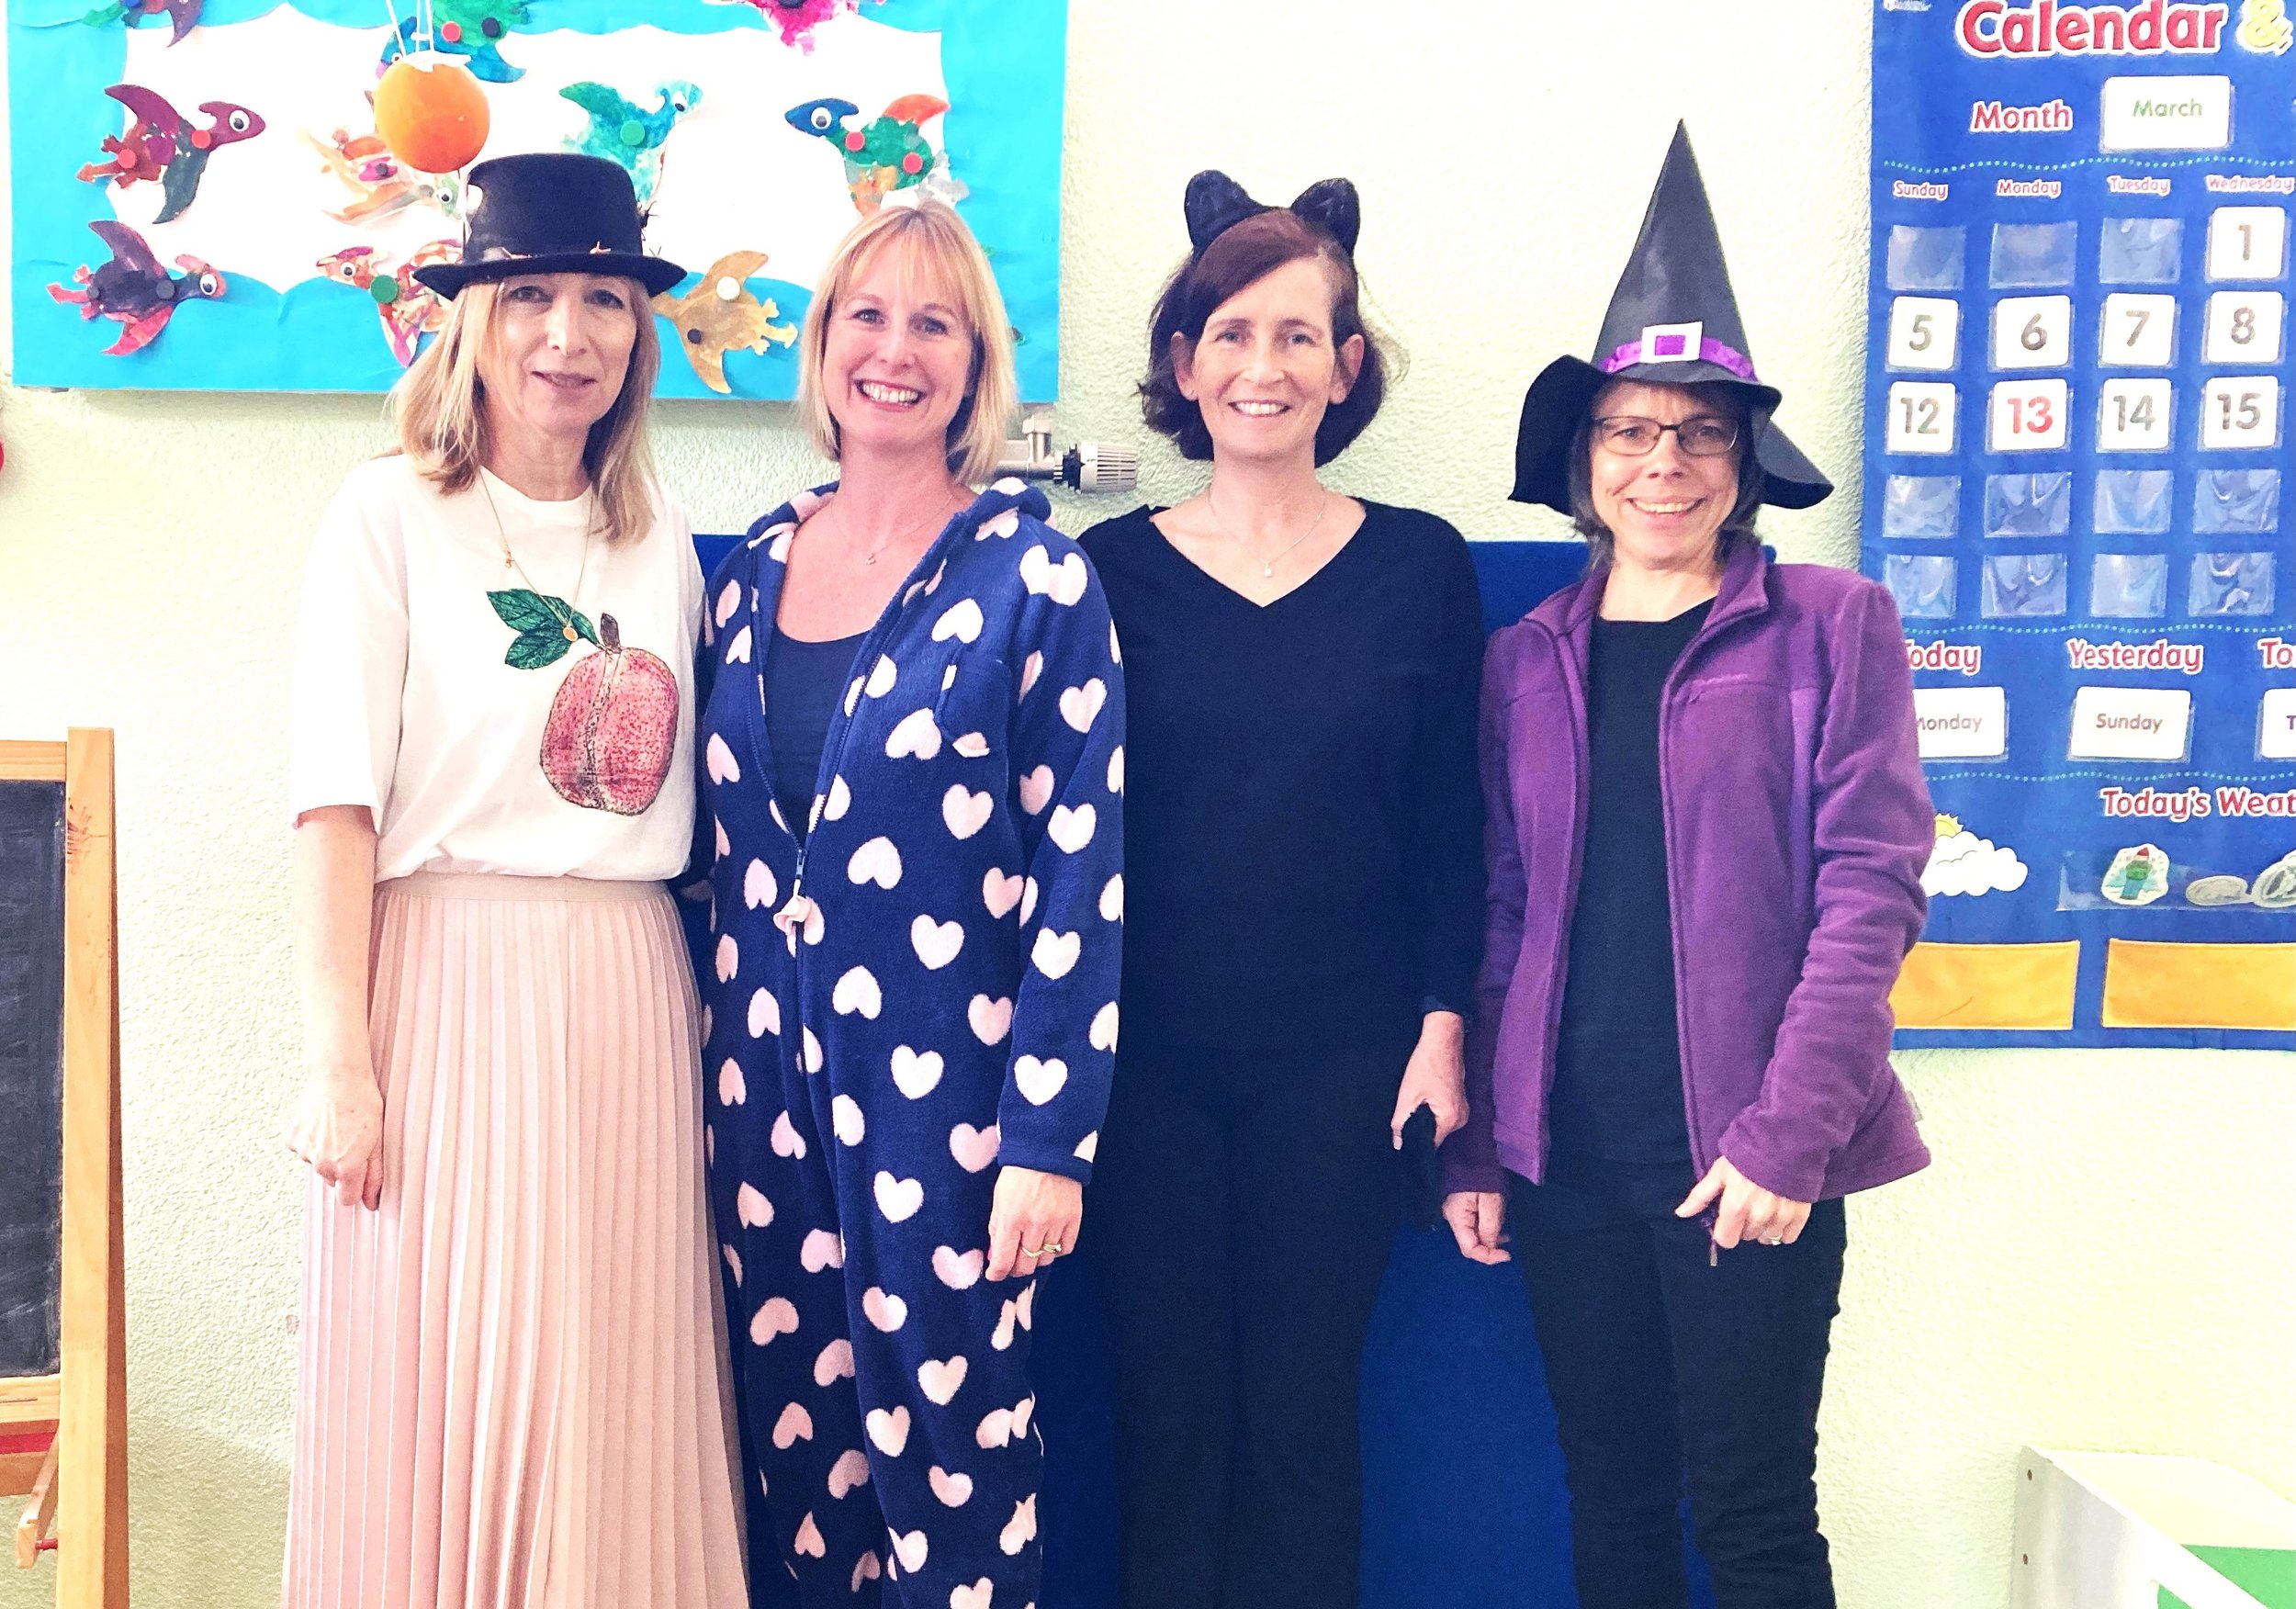 Our Reading Writing teachers dressed up as their favourite book characters.